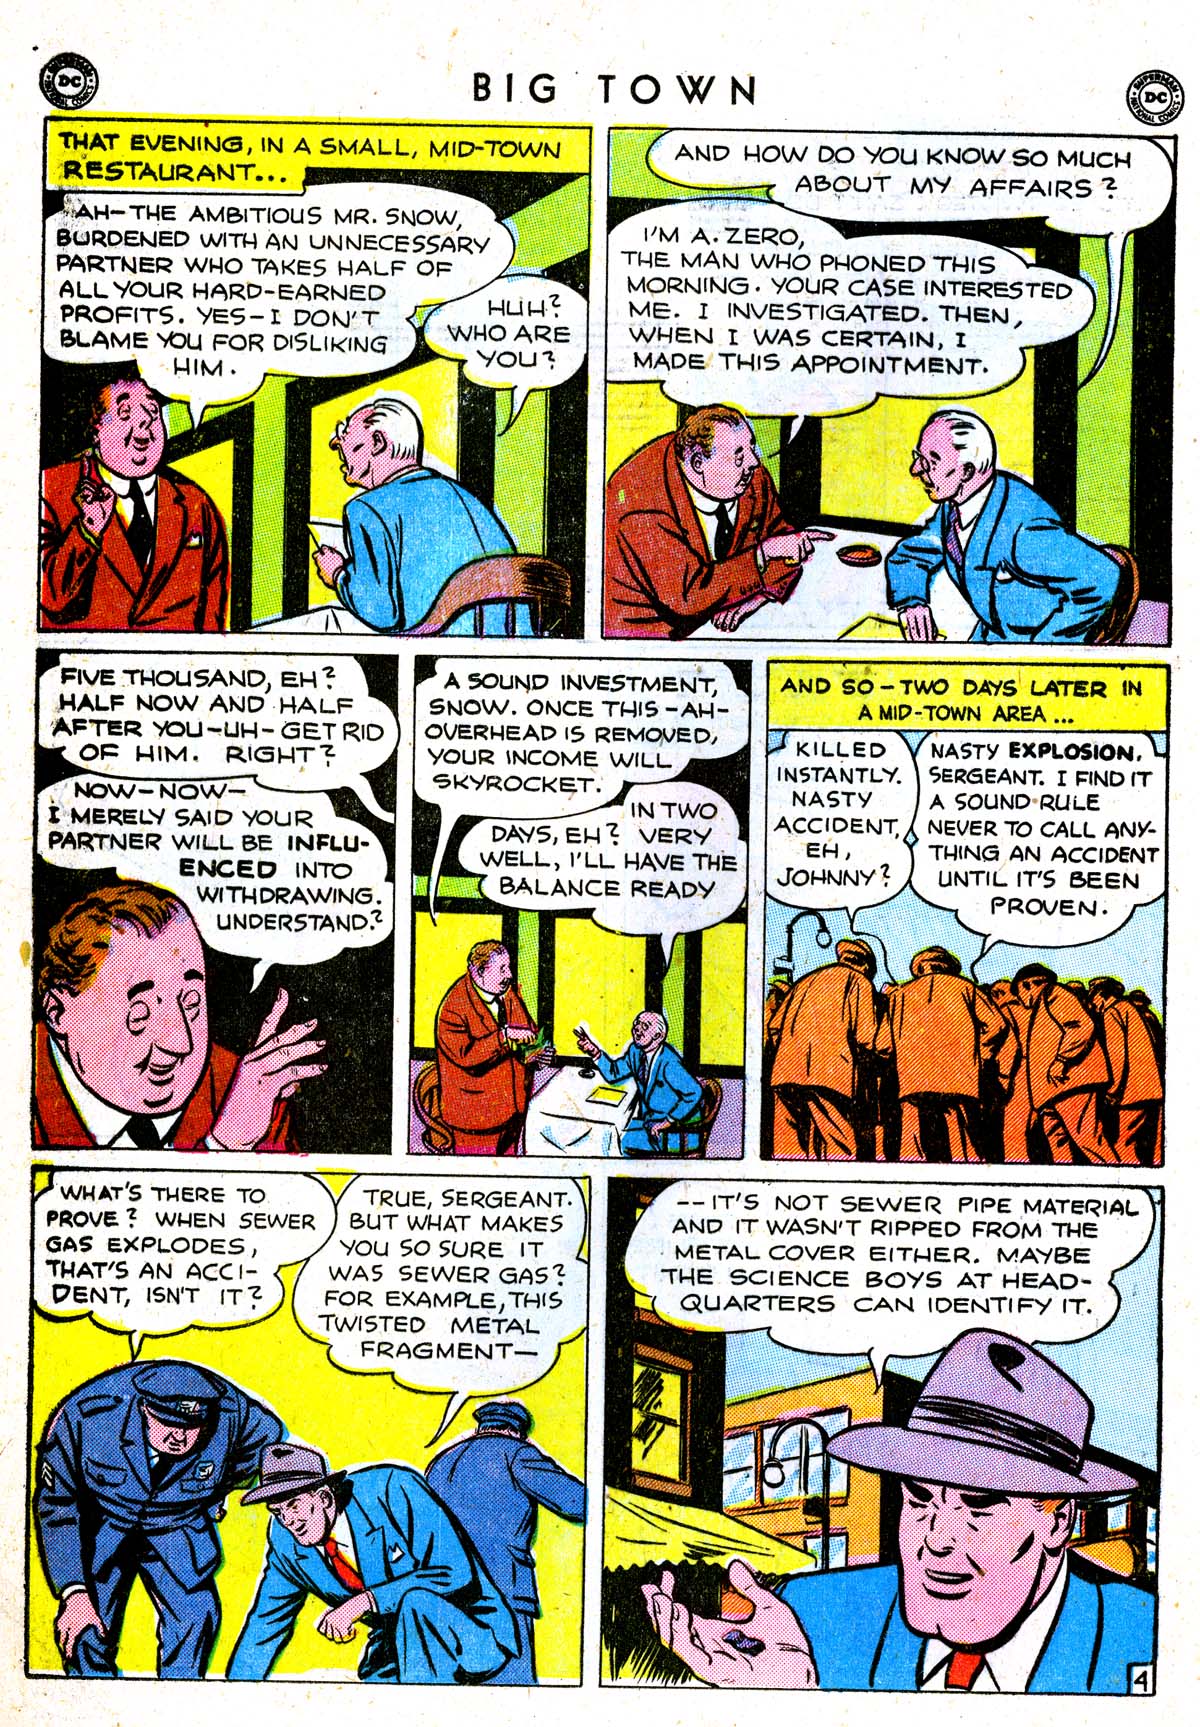 Big Town (1951) 4 Page 29